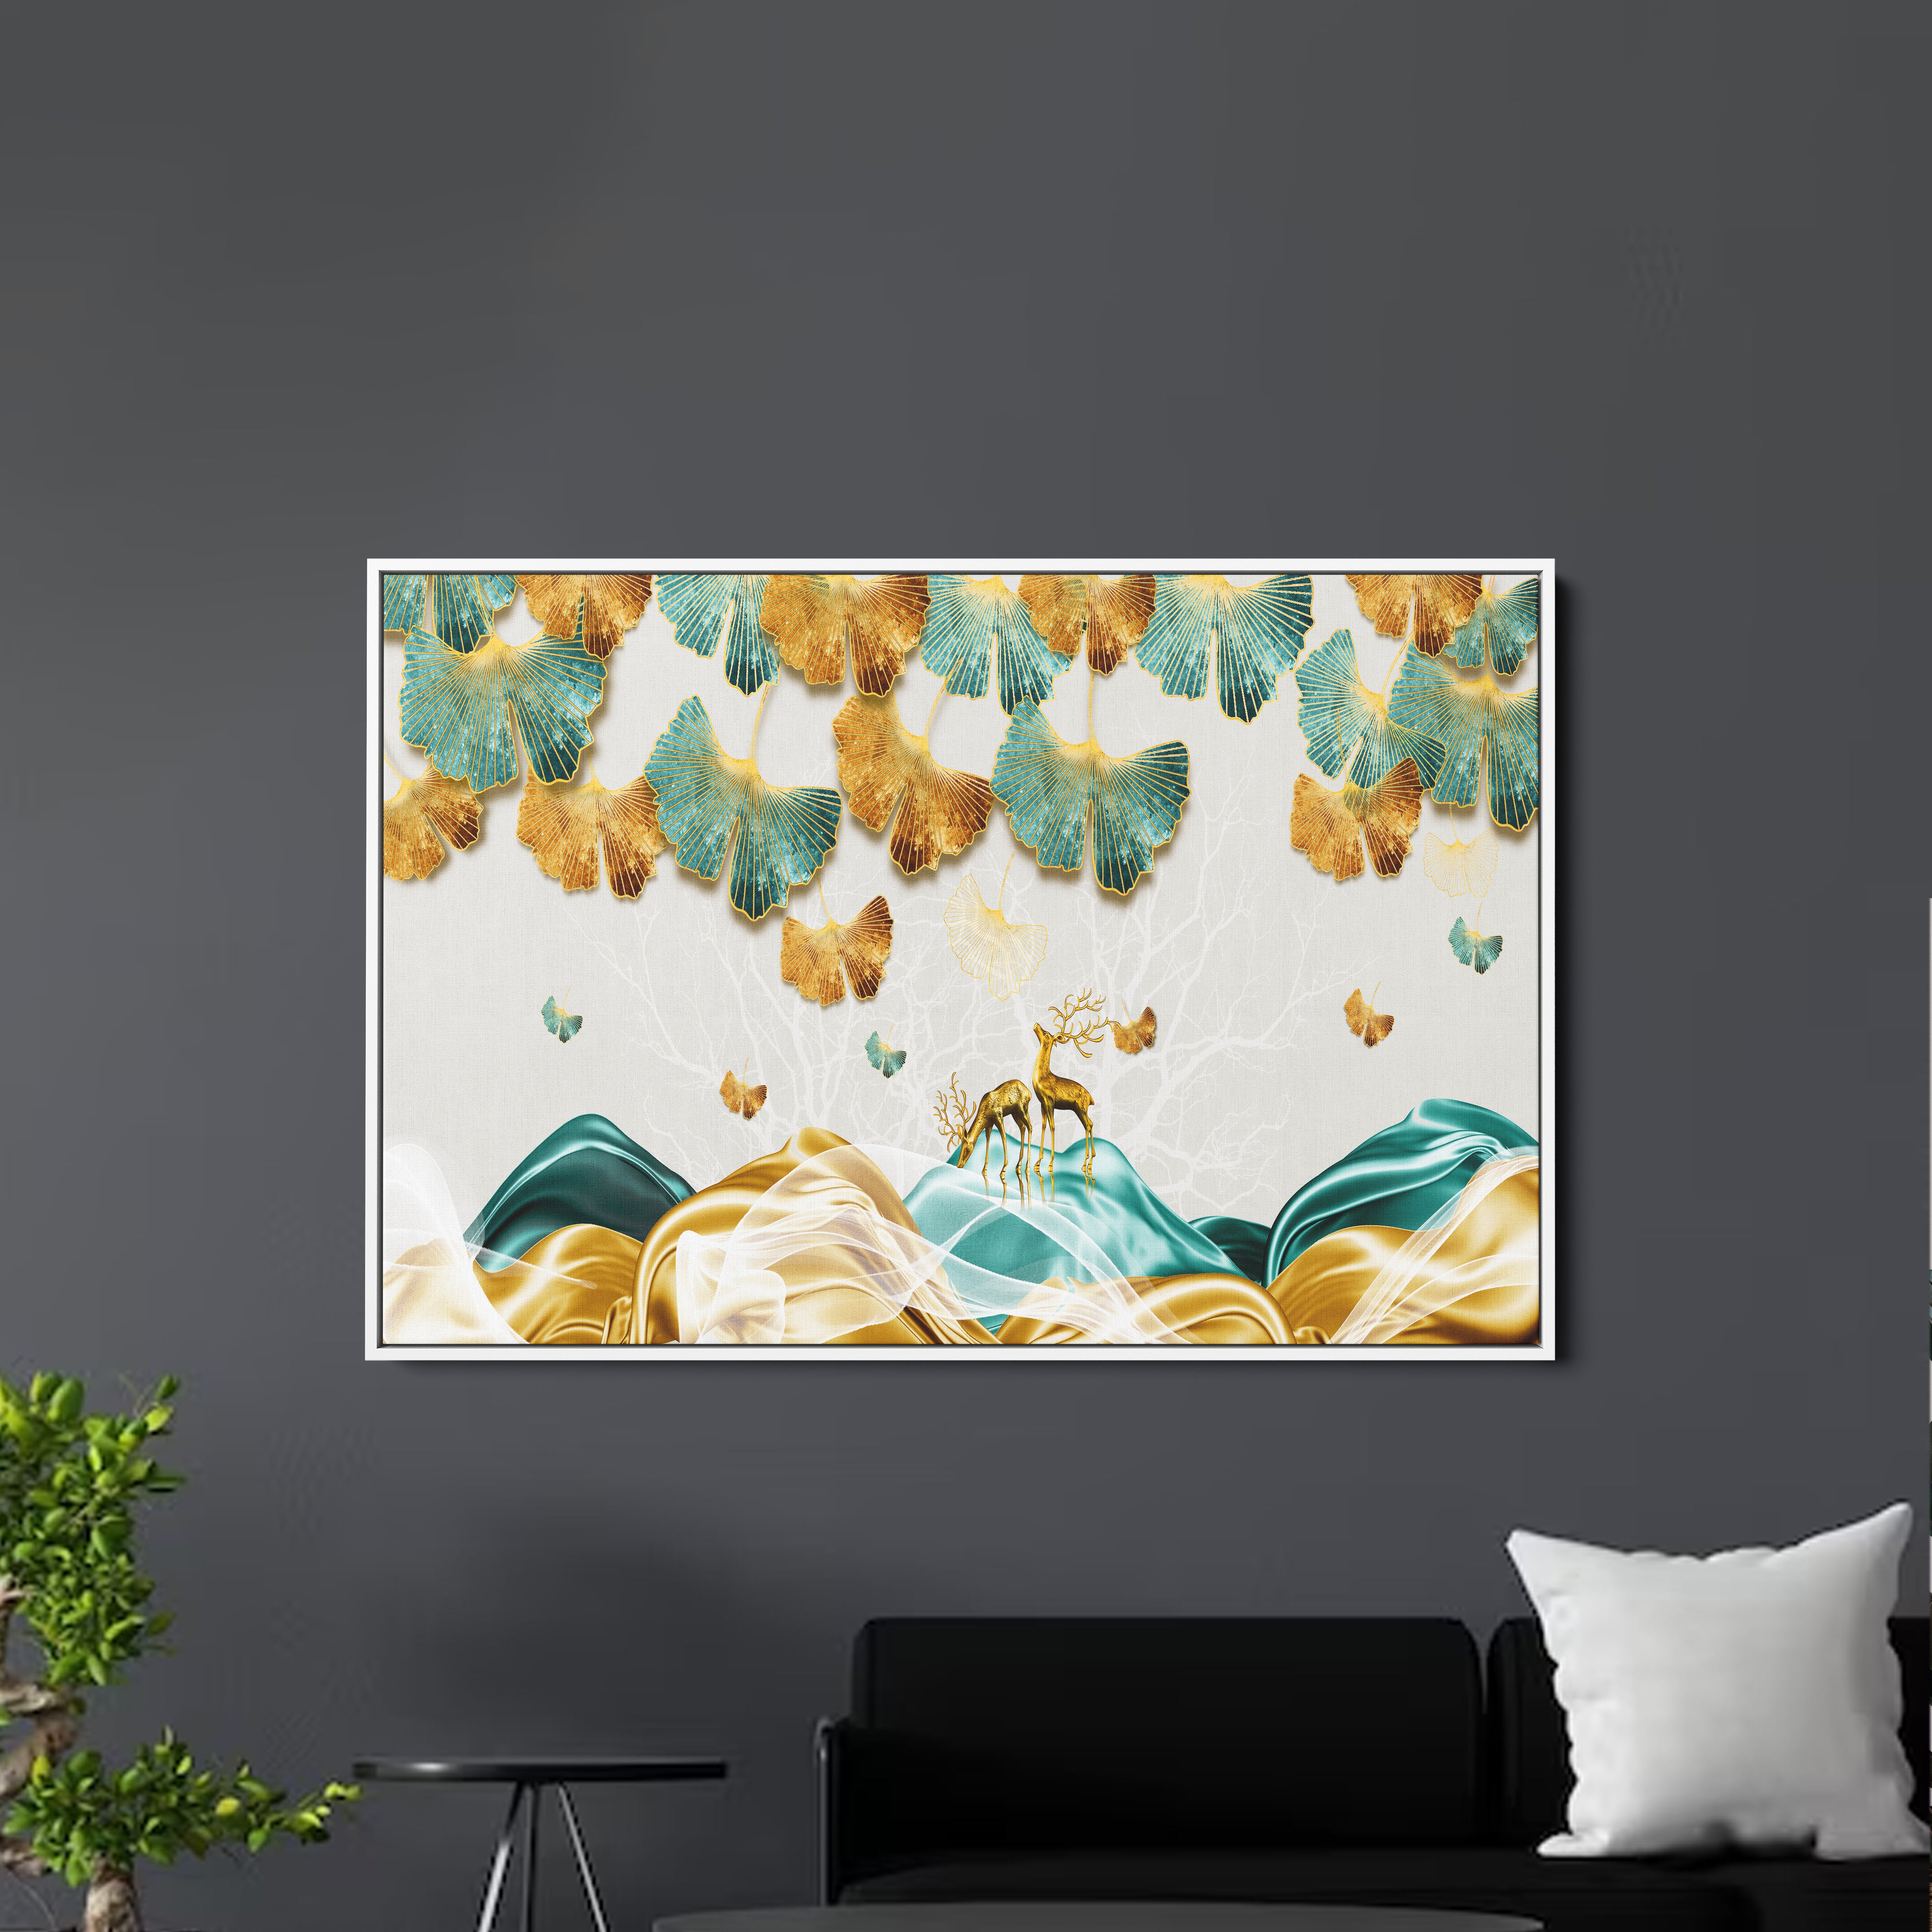 Golden Leaf And Deer Luxurious Abstract Art Canvas Wall Painting